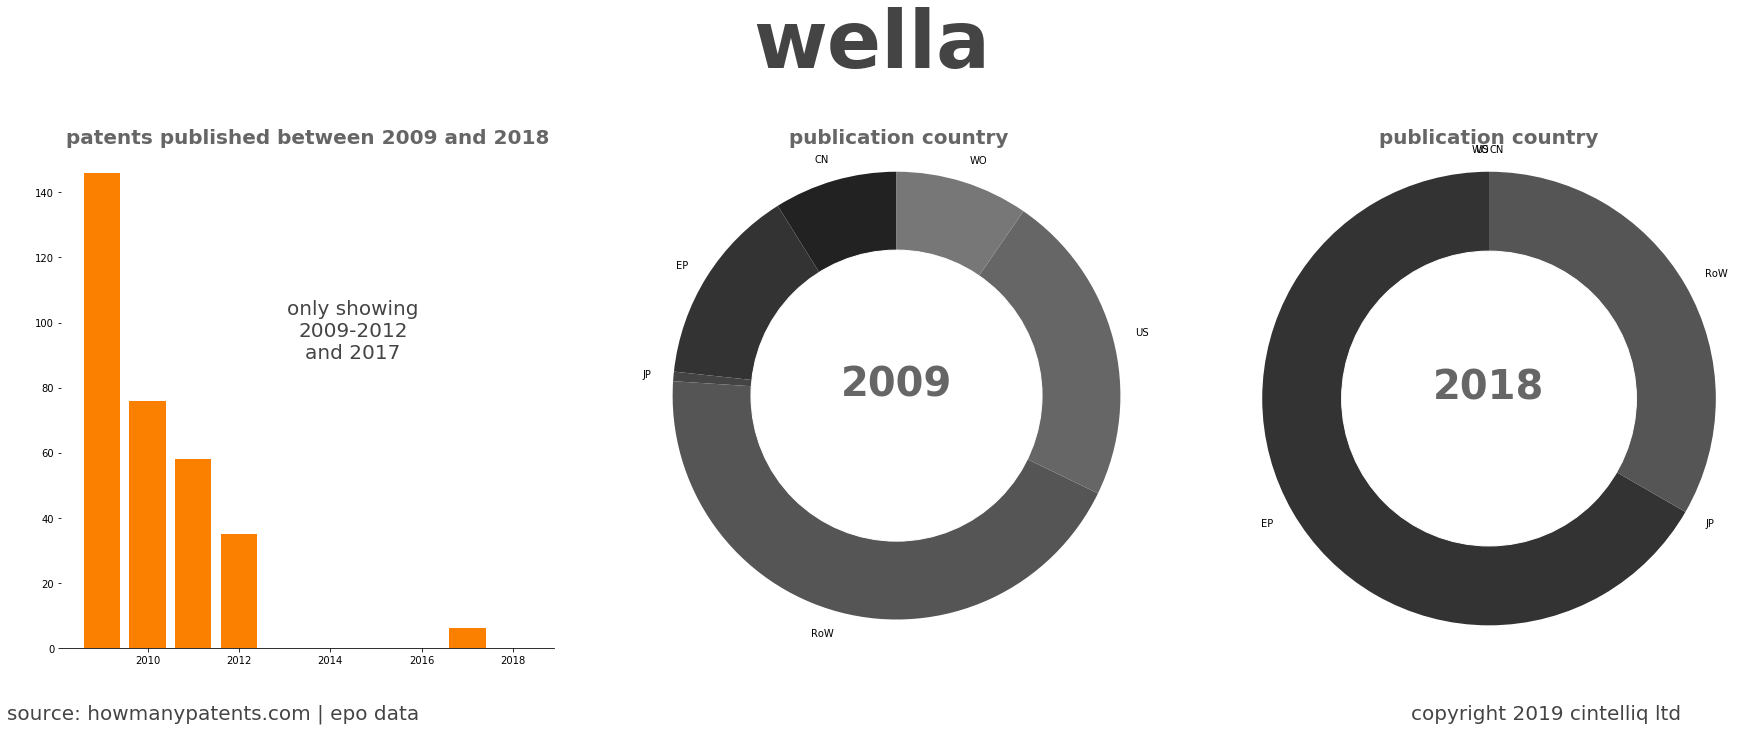 summary of patents for Wella